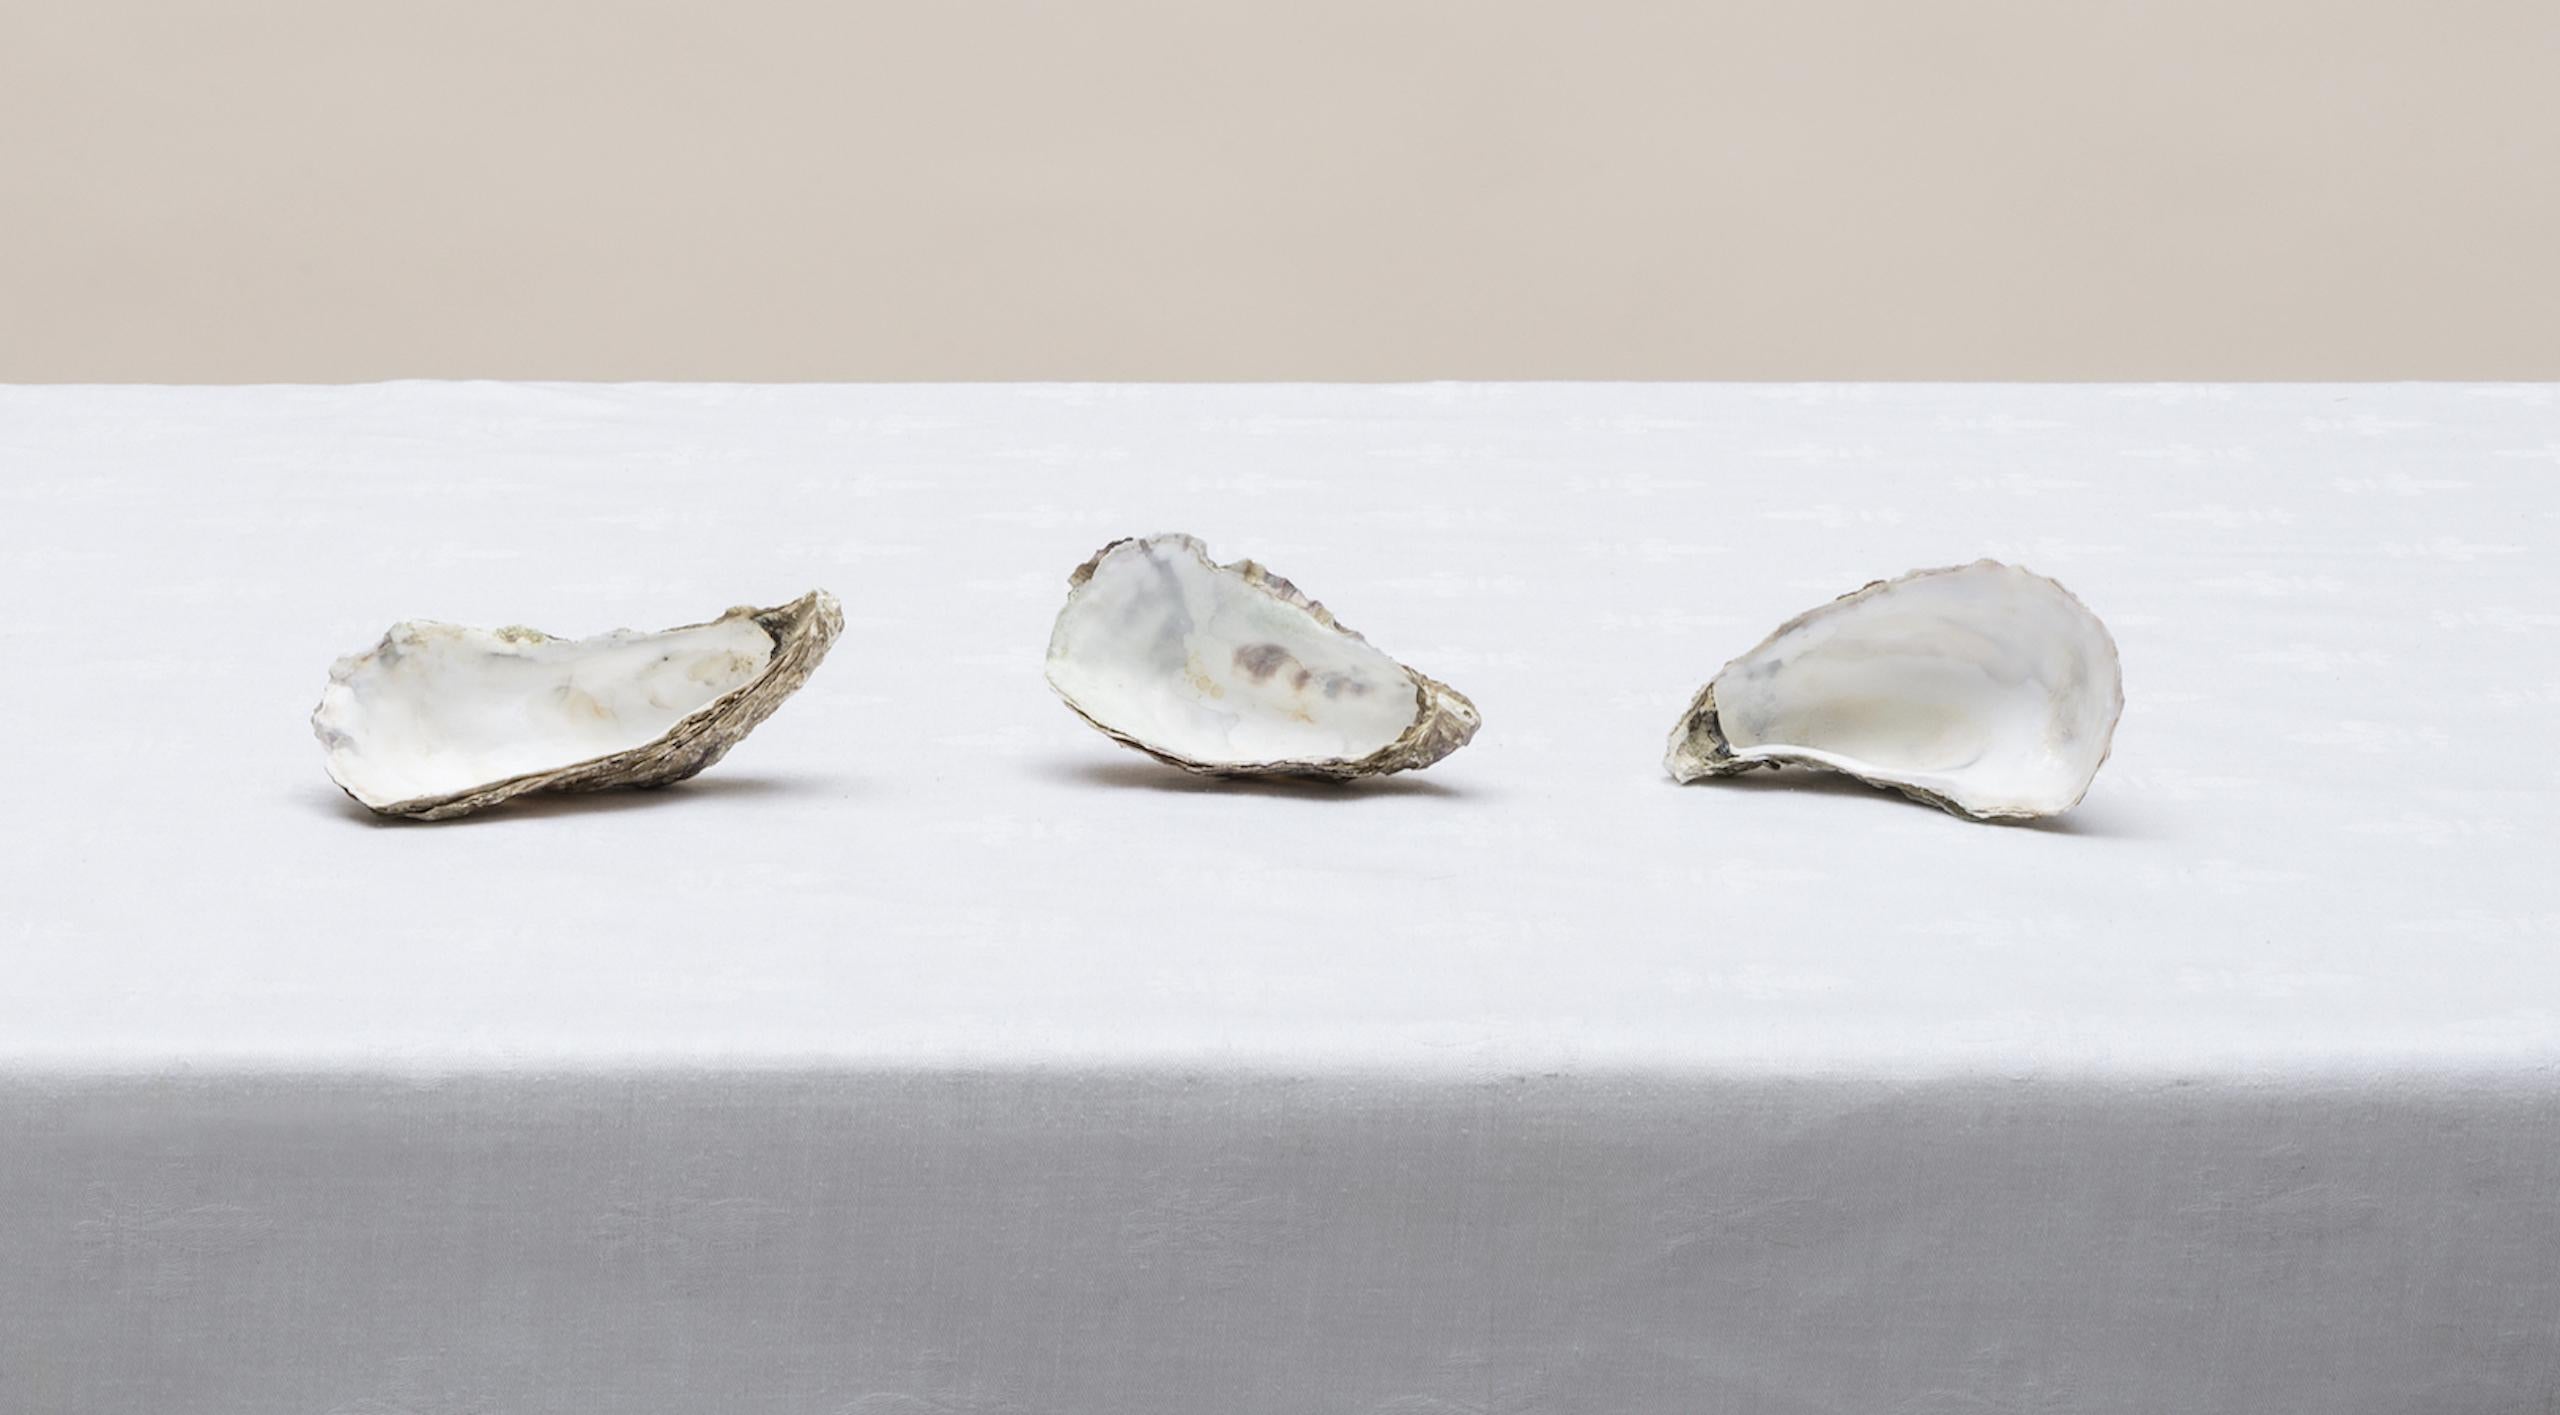 Untitled (#14-5) by Pawel Żak - Contemporary studio photography, oysters, shells For Sale 2